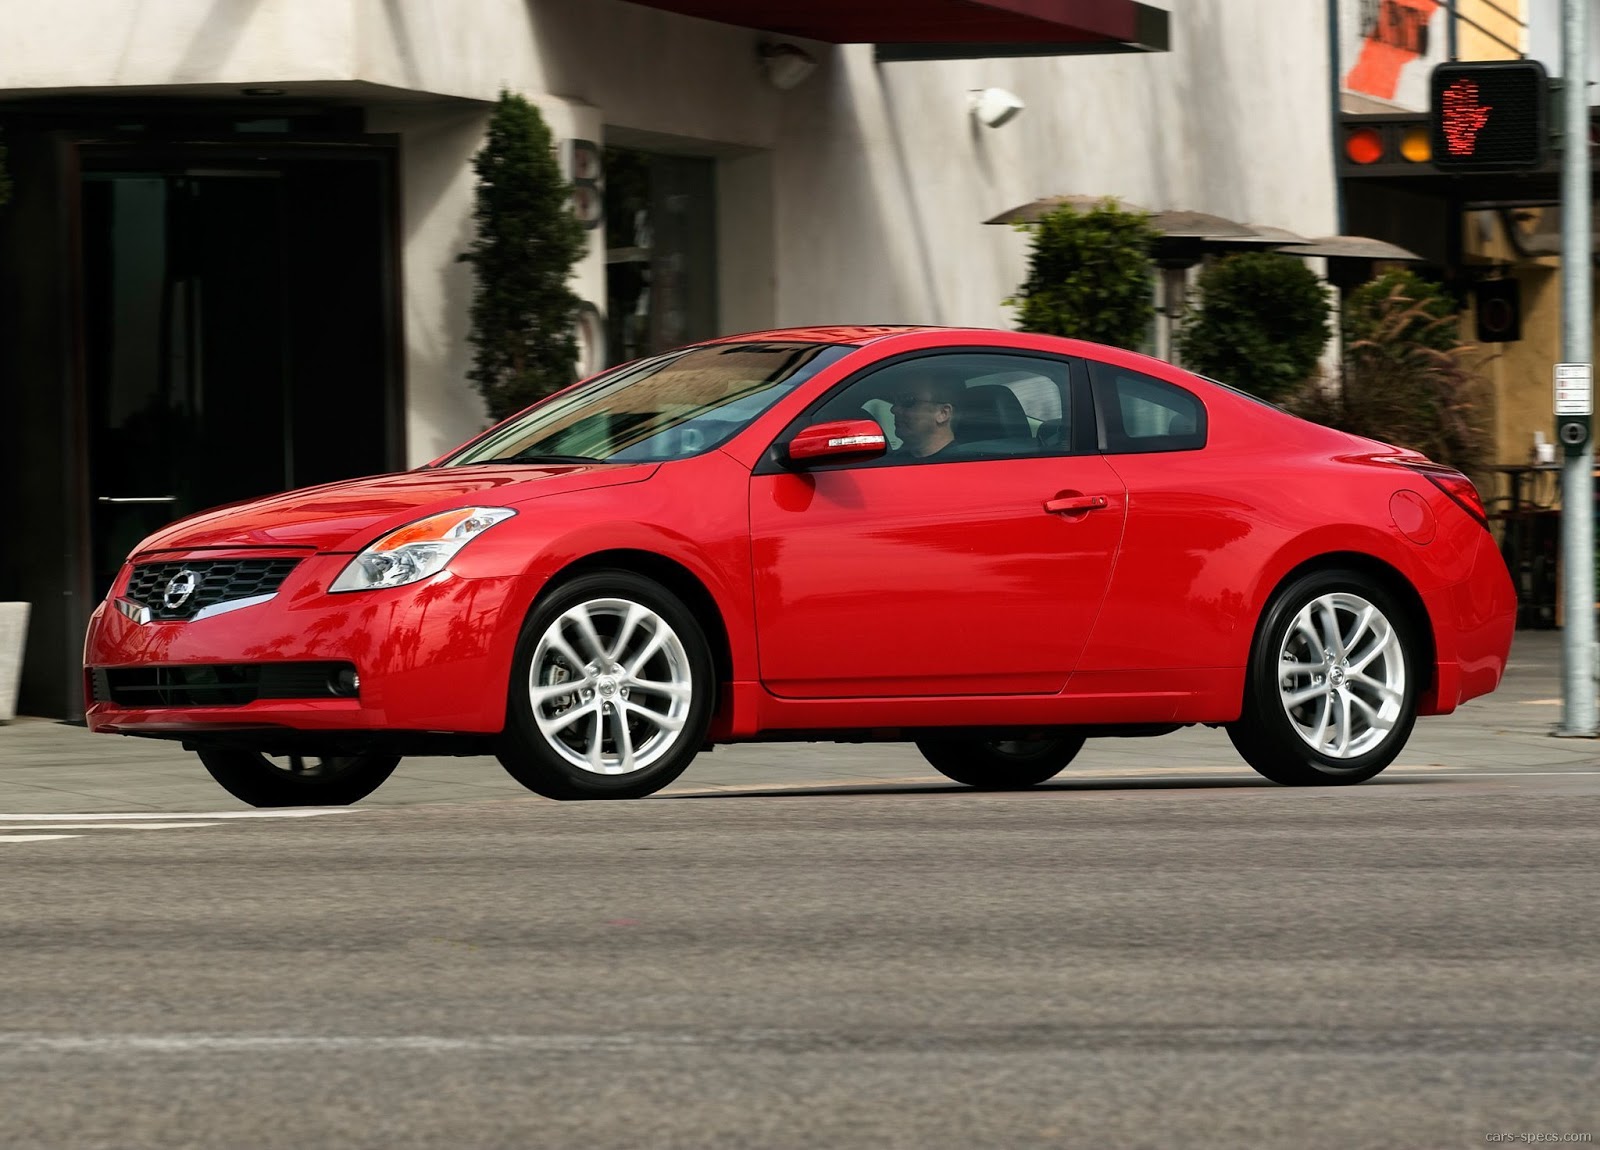 2008 Nissan Altima Coupe Specifications, Pictures, Prices